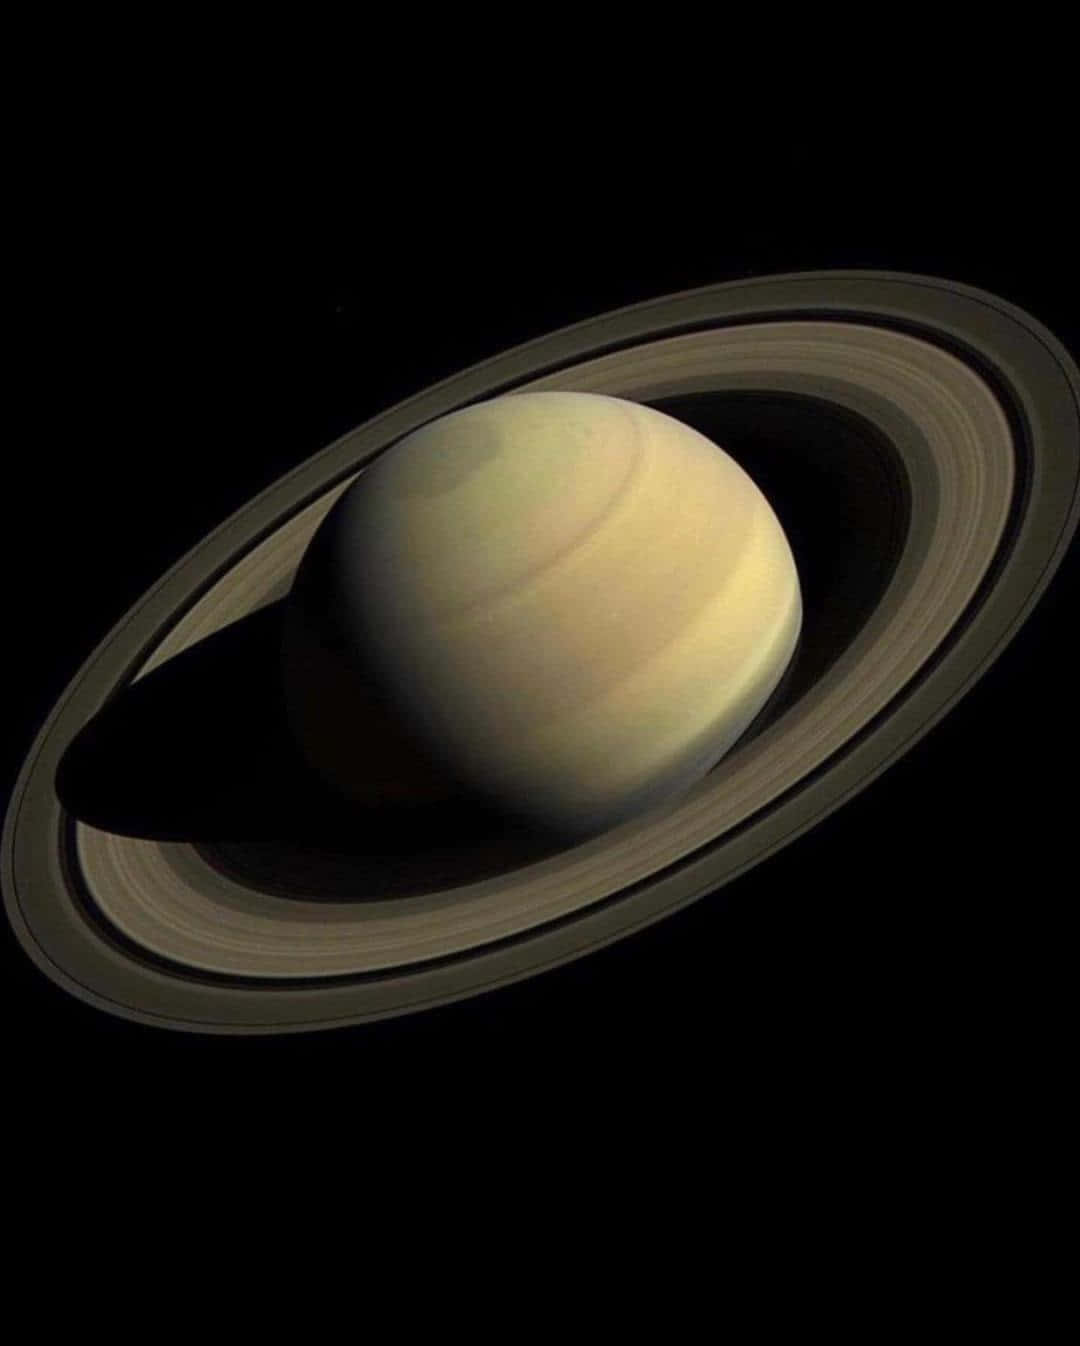 Majestic Saturn and its Rings